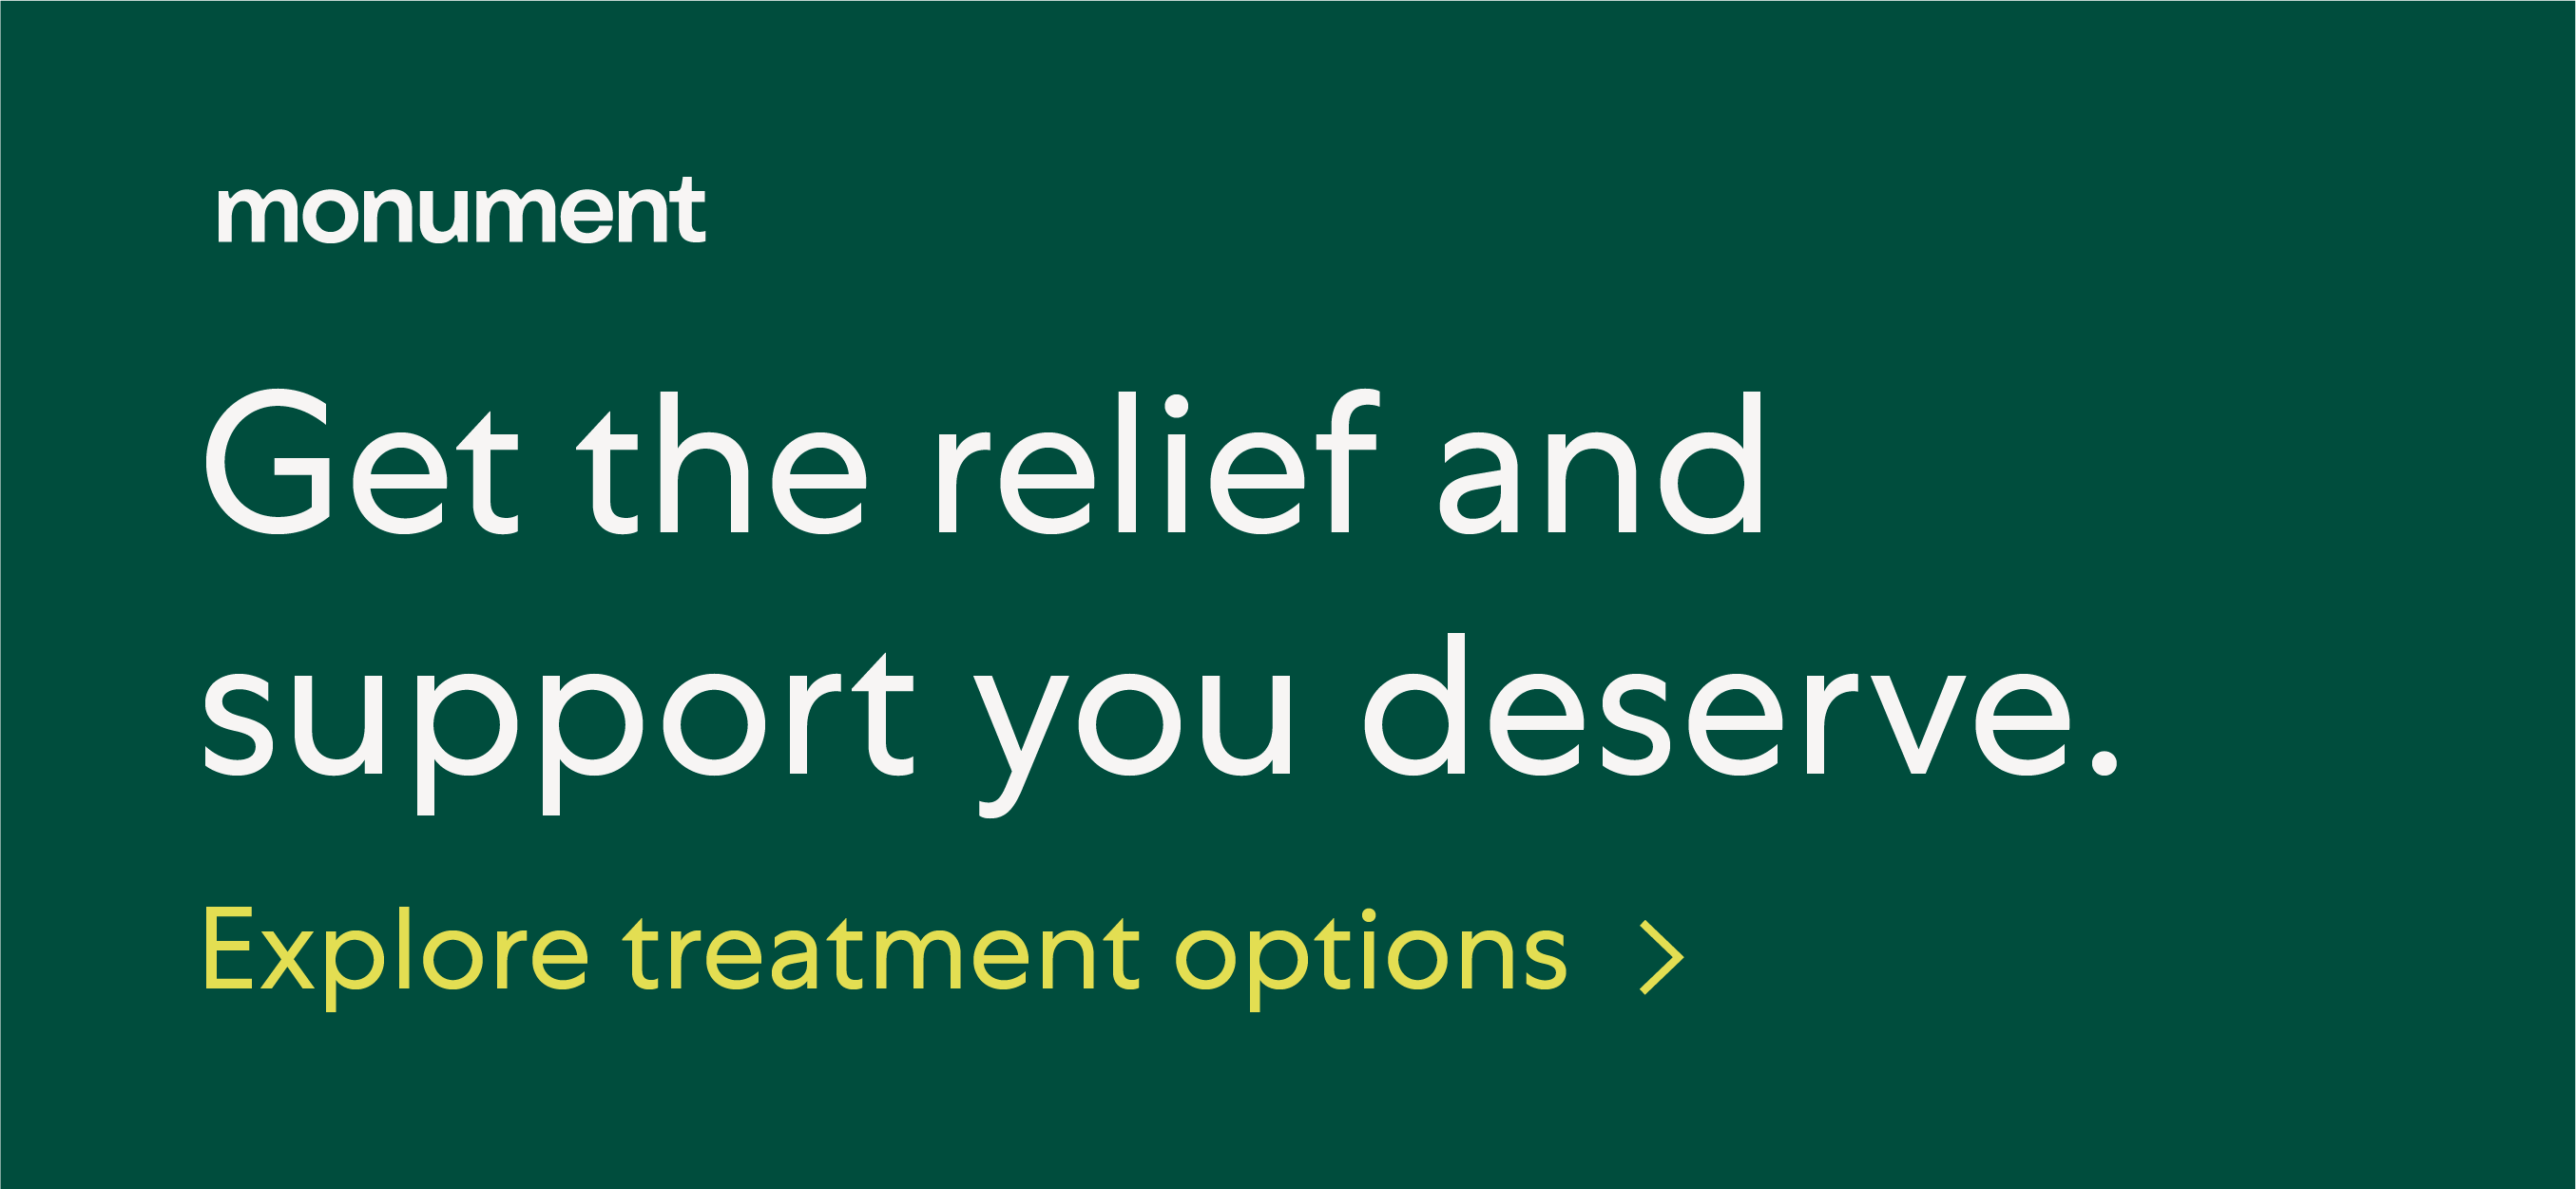 Get the relief and support you deserve. Explore treatment options.